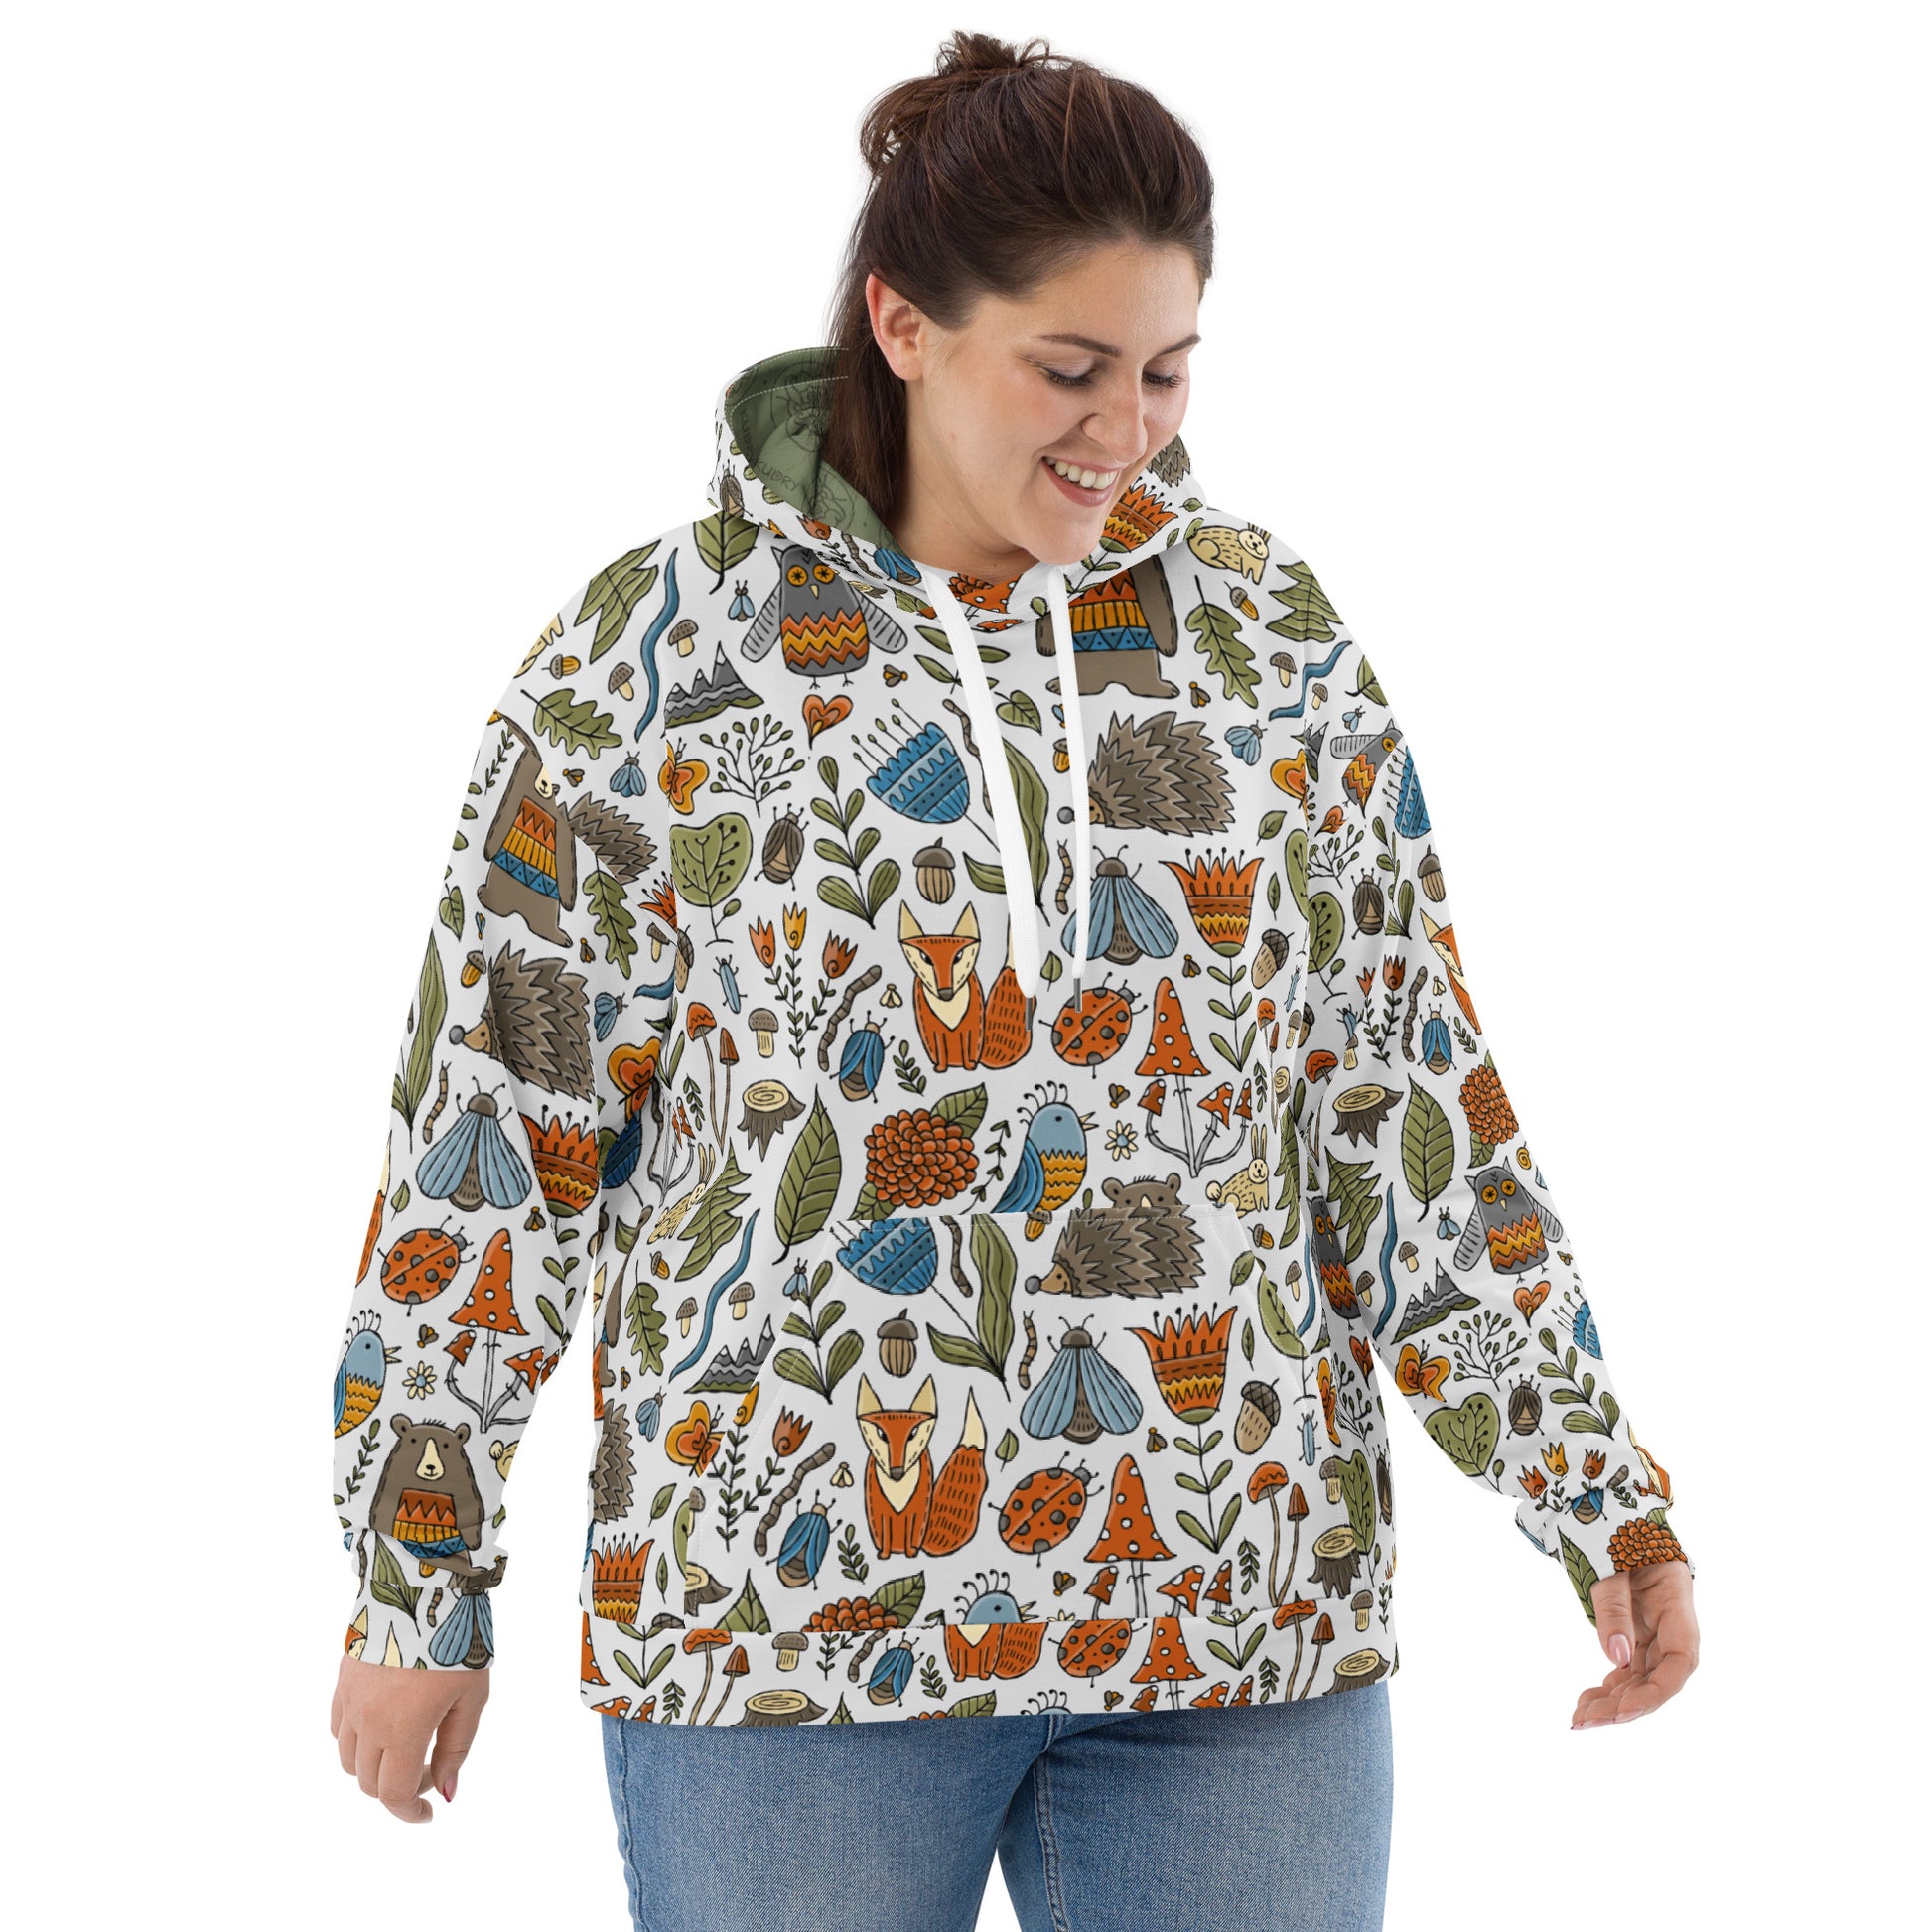 Woman wear in Artistic Designer Hoodie all over print vintage style with magic world illustration of forest - animals and birds flowers and nature bear fox owls butterflies hedgehog insects mashrooms and trees. Festival comfortable stylish wear trendy fashionable rare beautiful unique. Big size. Kudry